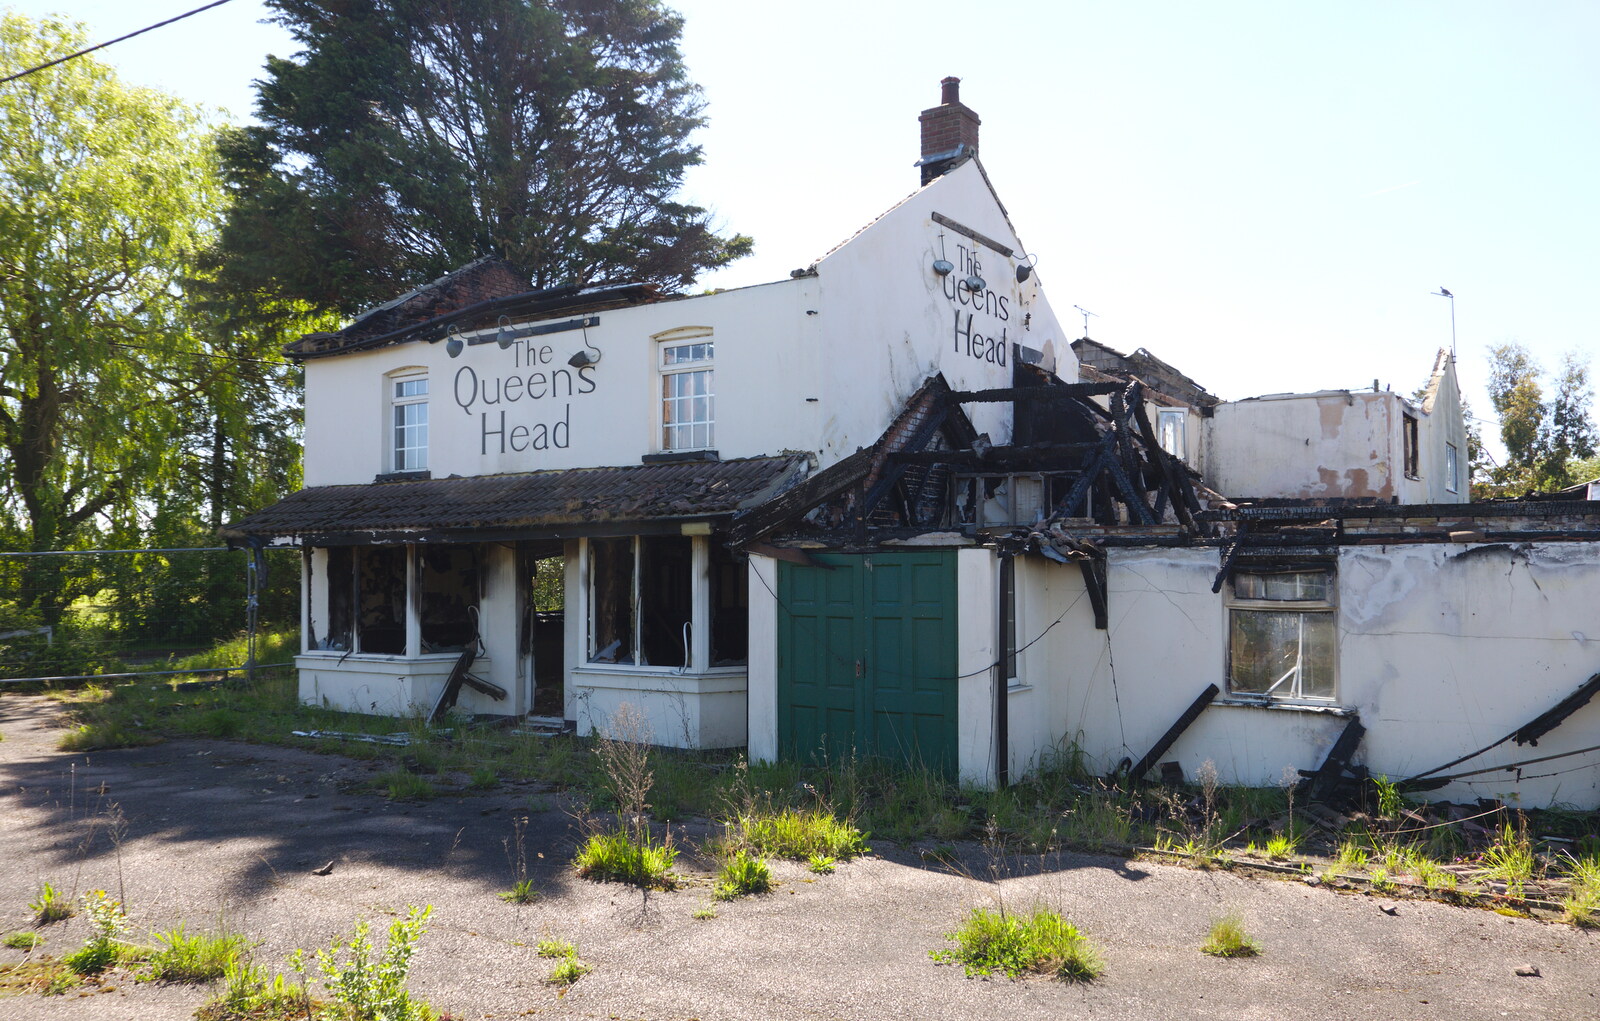 The BSCC Bike Ride 2019, Coggeshall, Essex - 11th May 2019: The tragic sight of a burned-down pub